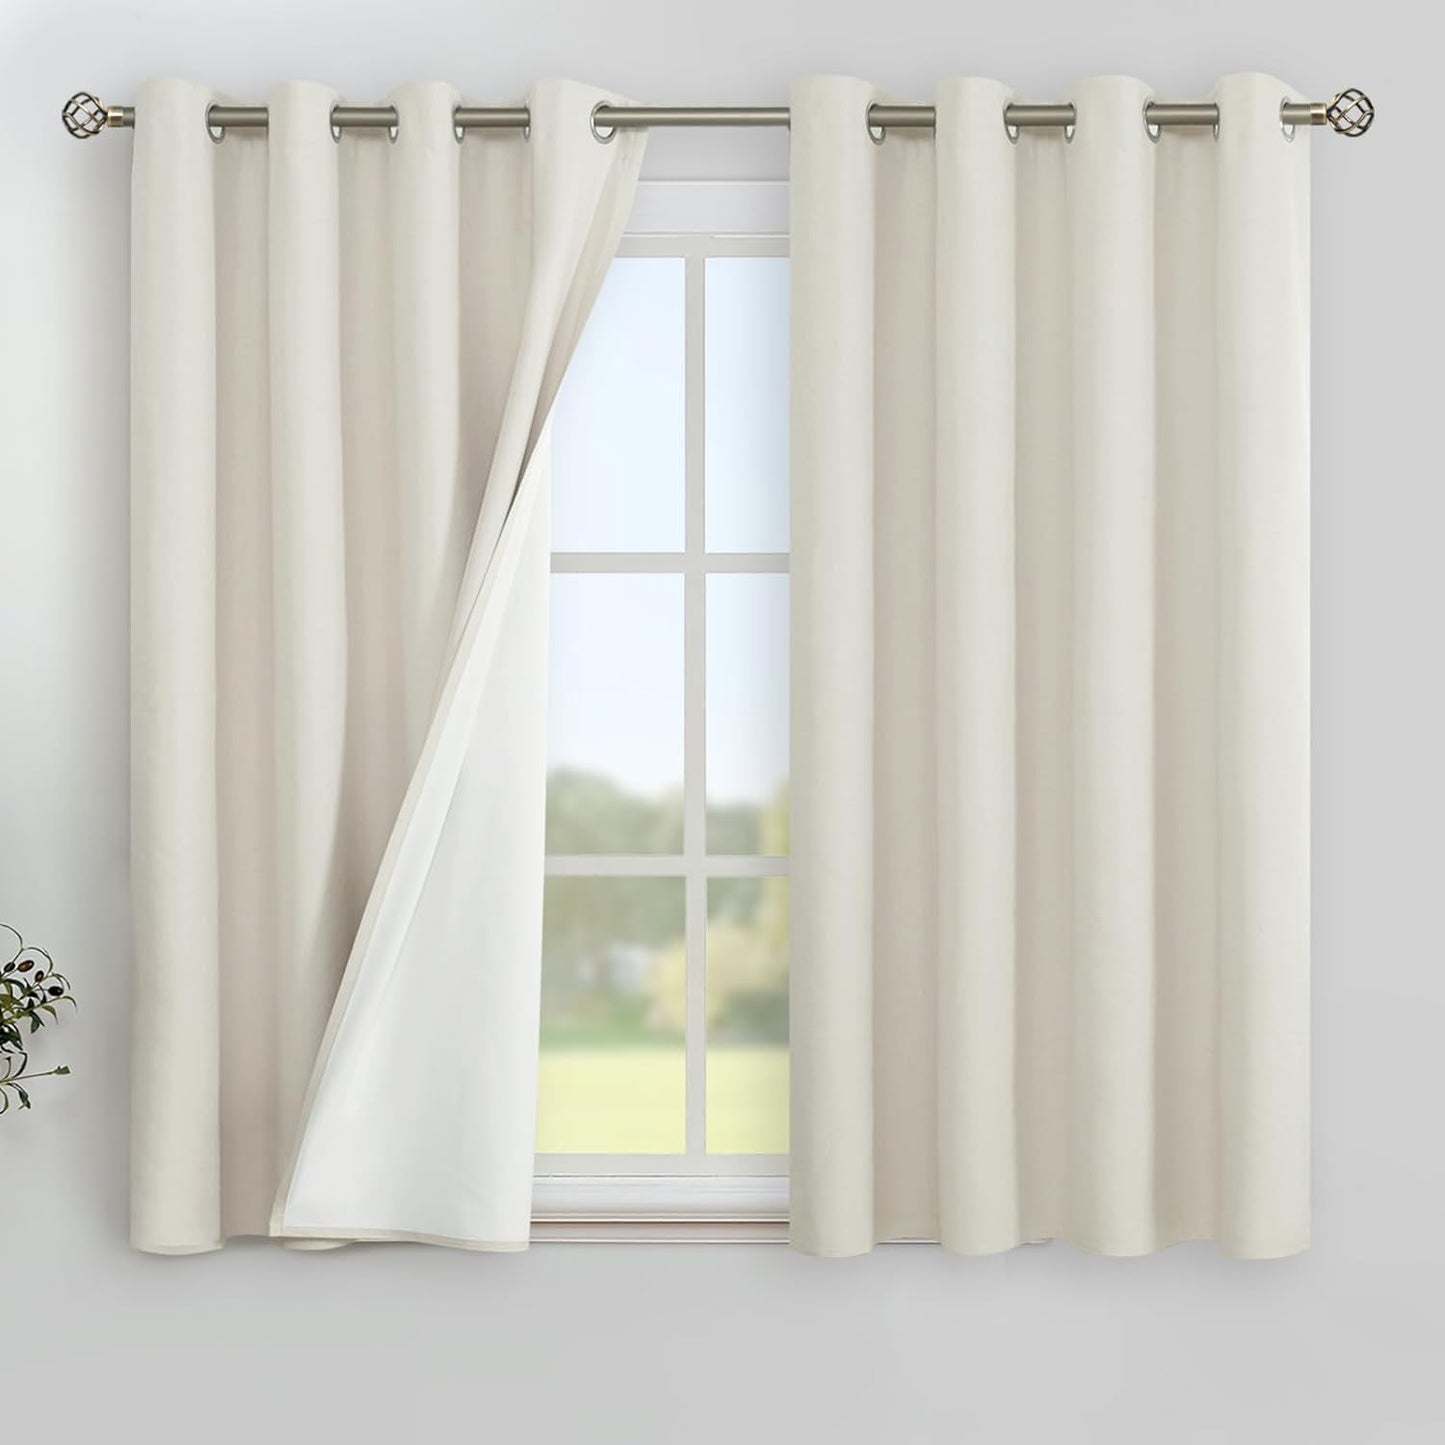 Youngstex Linen Blackout Curtains 63 Inches Long, Grommet Full Room Darkening Linen Window Drapes Thermal Insulated for Living Room Bedroom, 2 Panels, 52 X 63 Inch, Linen  YoungsTex Linen 52W X 45L 